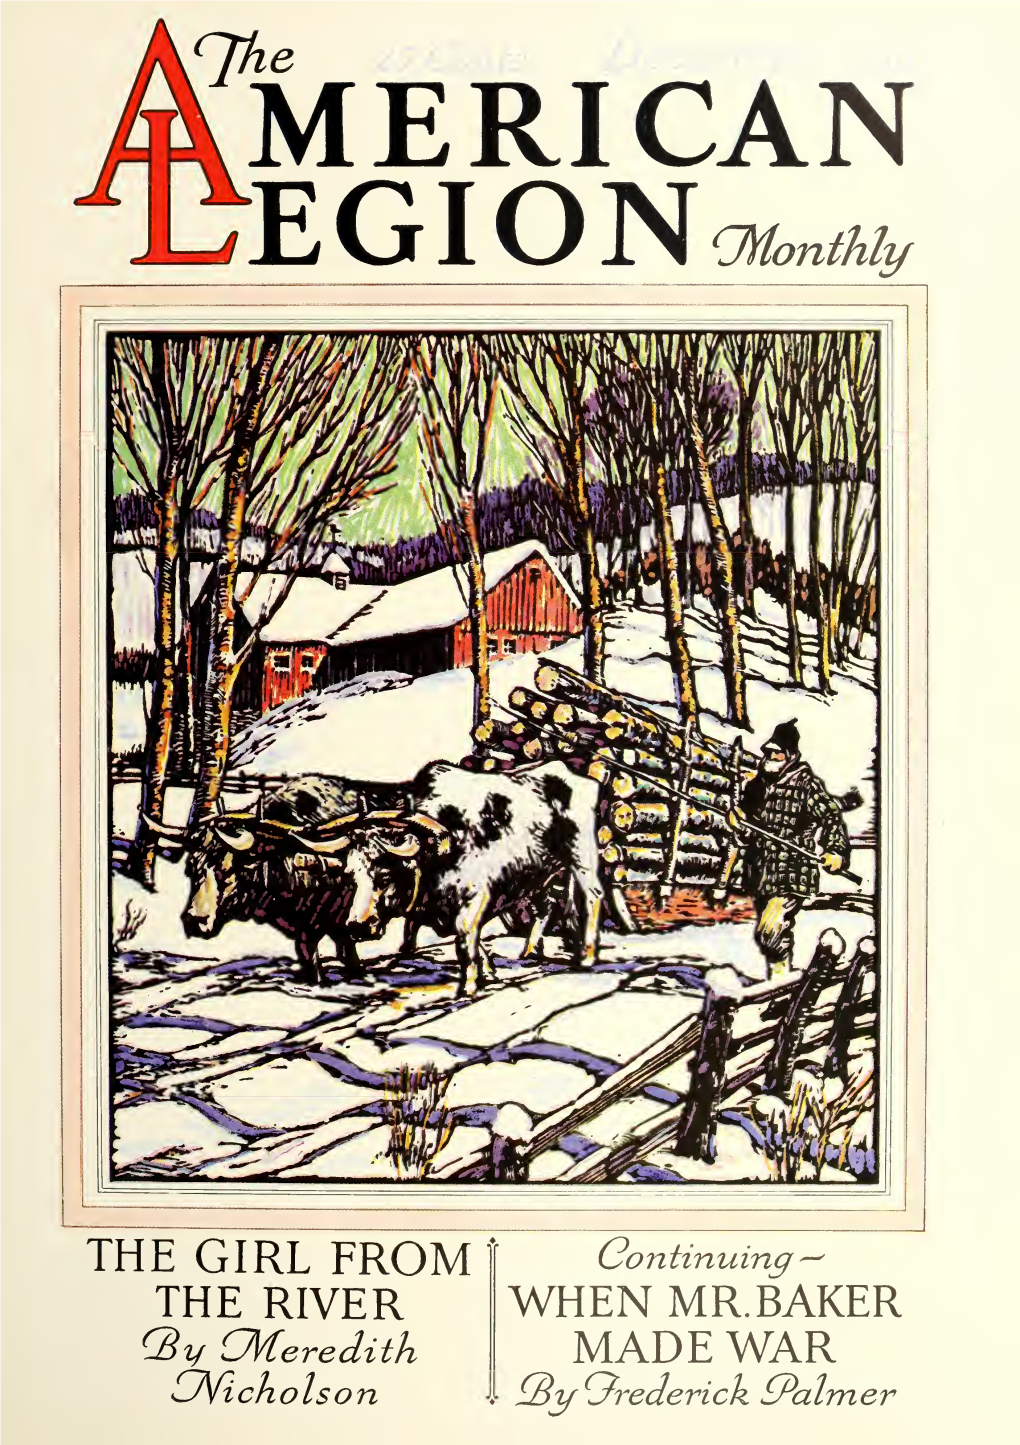 The American Legion Monthly [Volume 9, No. 6 (December 1930)]